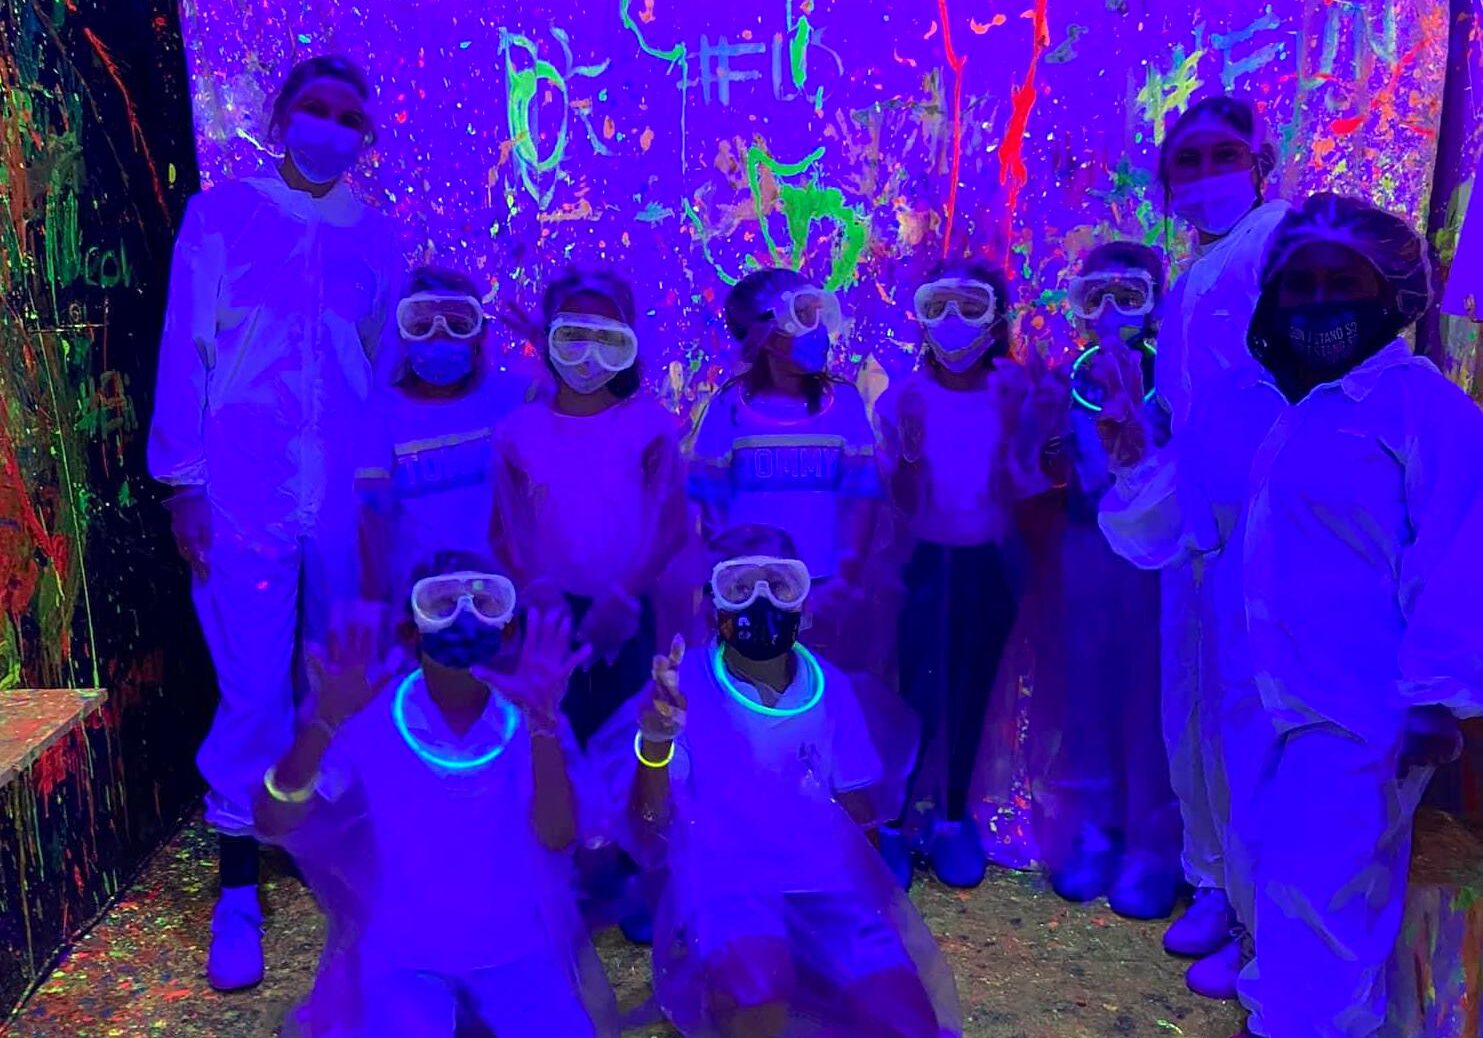 How to get the most out of your glow in the dark neon disco party -  Absolutely Amazing Children's Entertainment